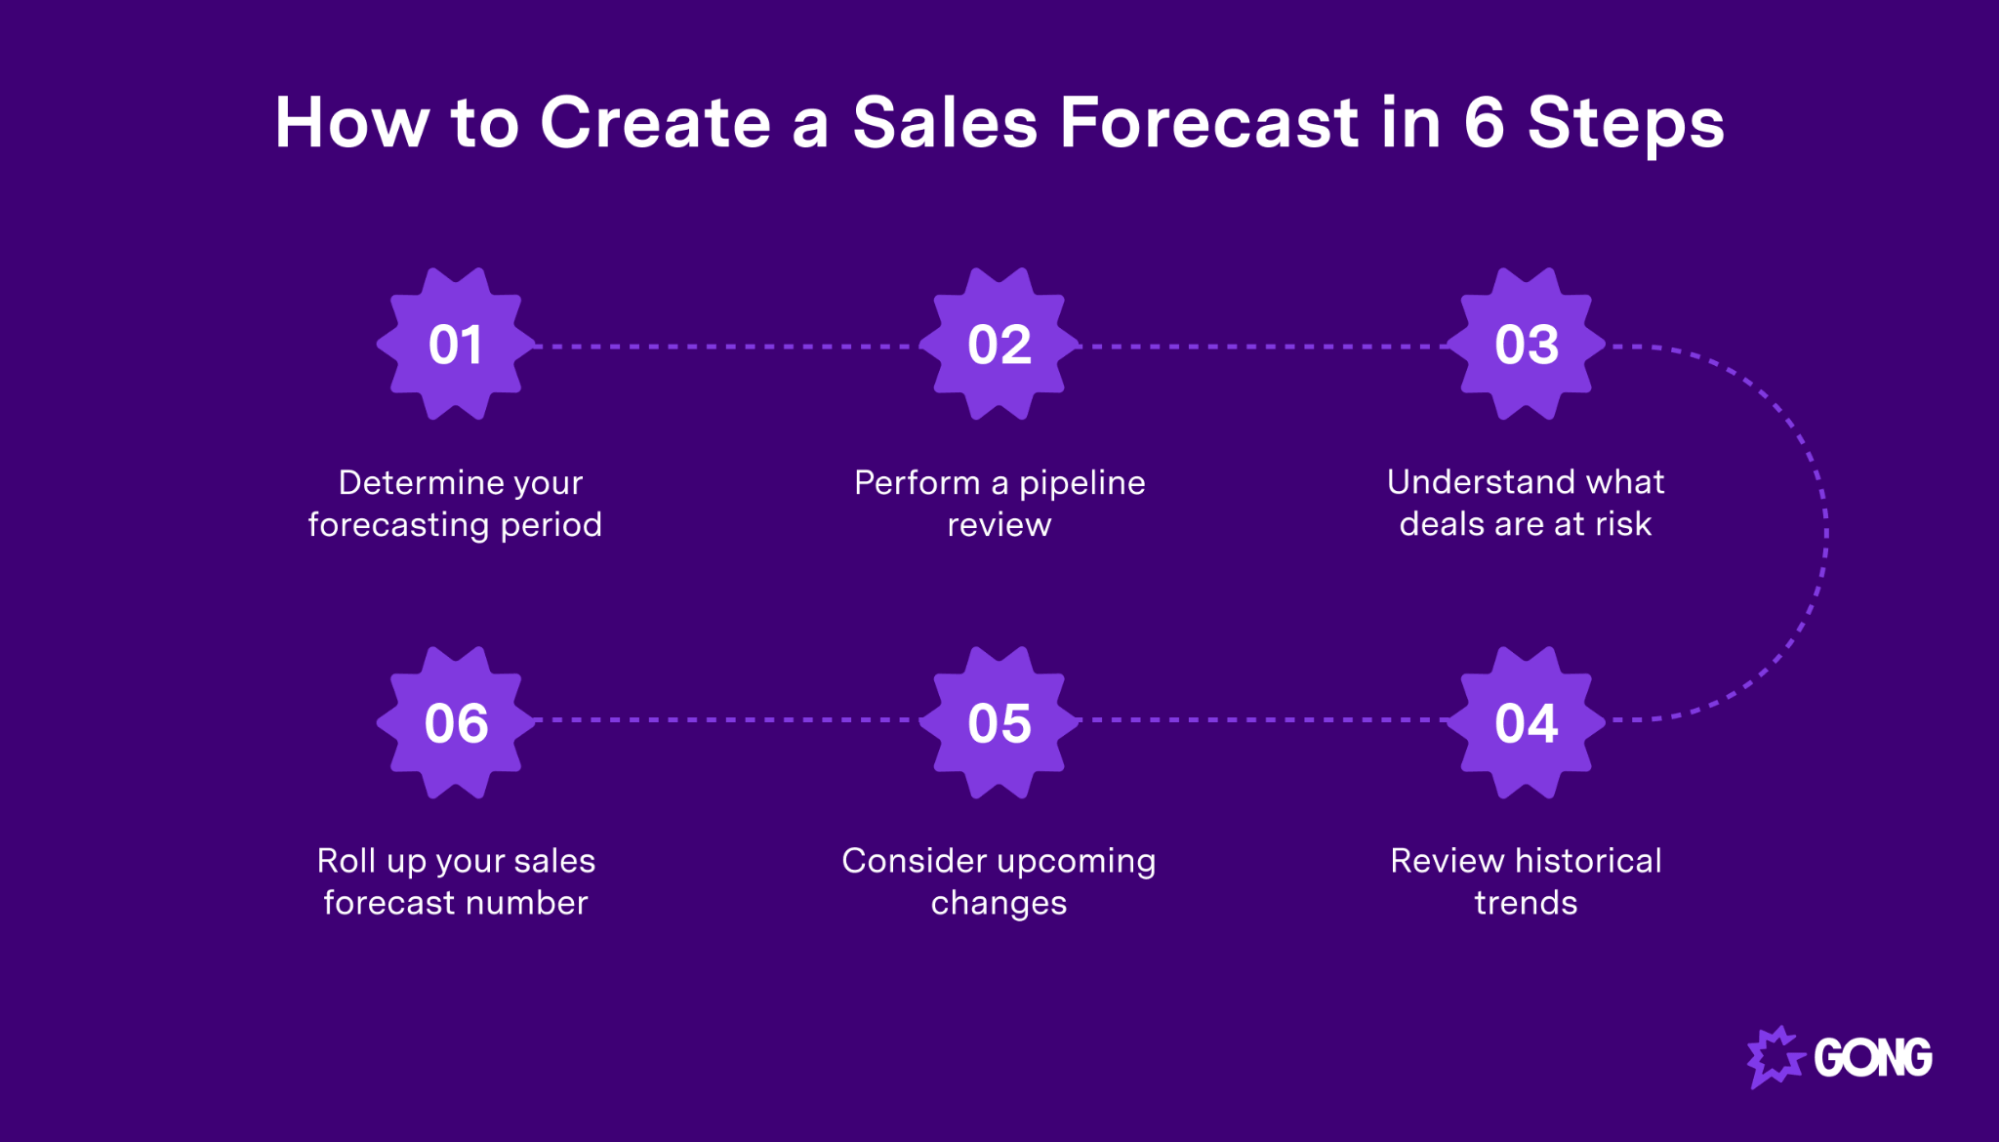 how to create a sales forecast in 6 steps?